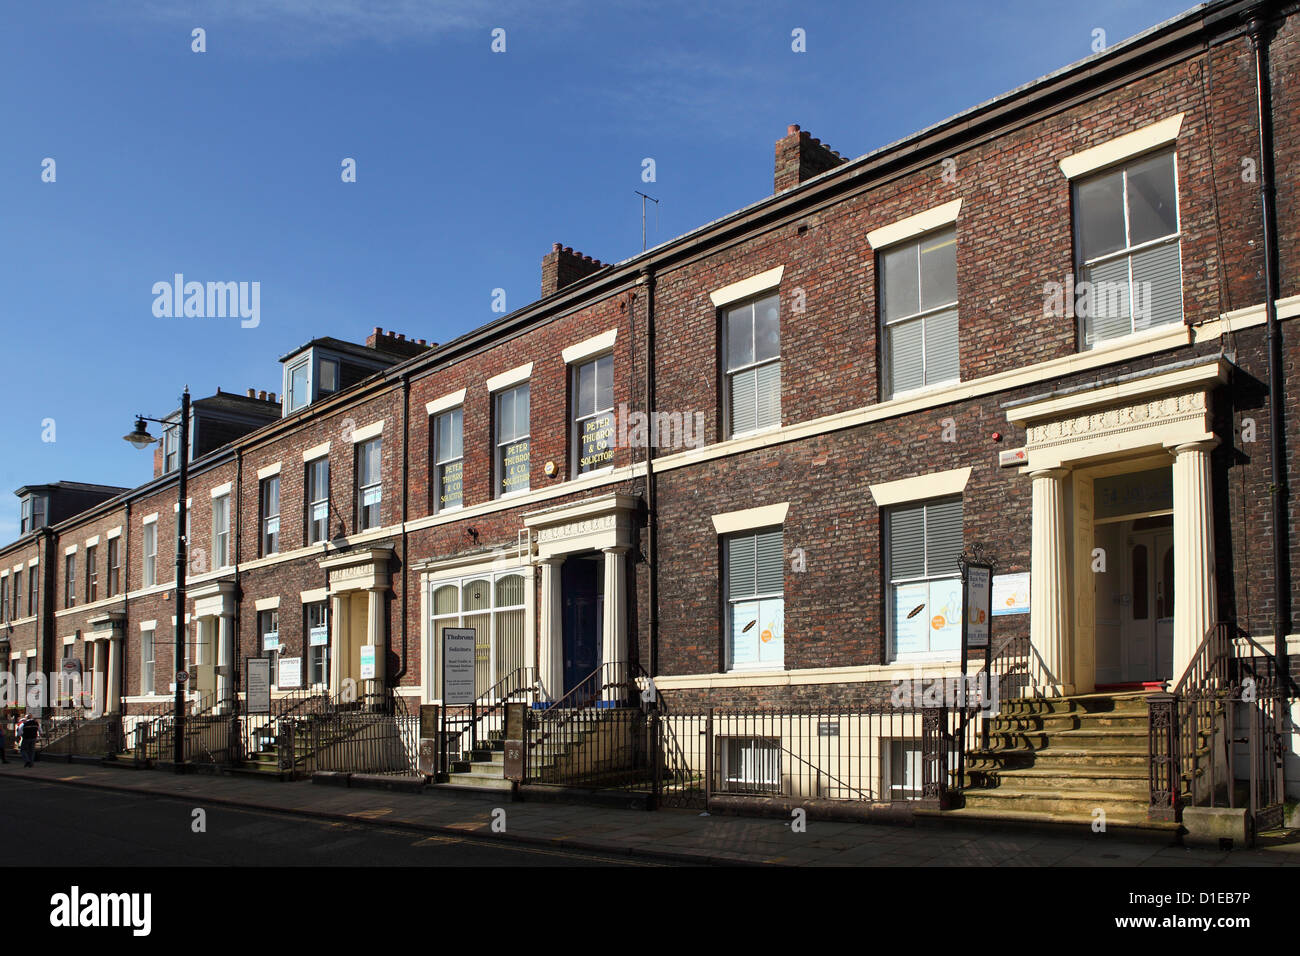 Early Victorian terraced town houses, built in the mid-19th century, Sunderland, Tyne and Wear, England, United Kingdom, Europe Stock Photo